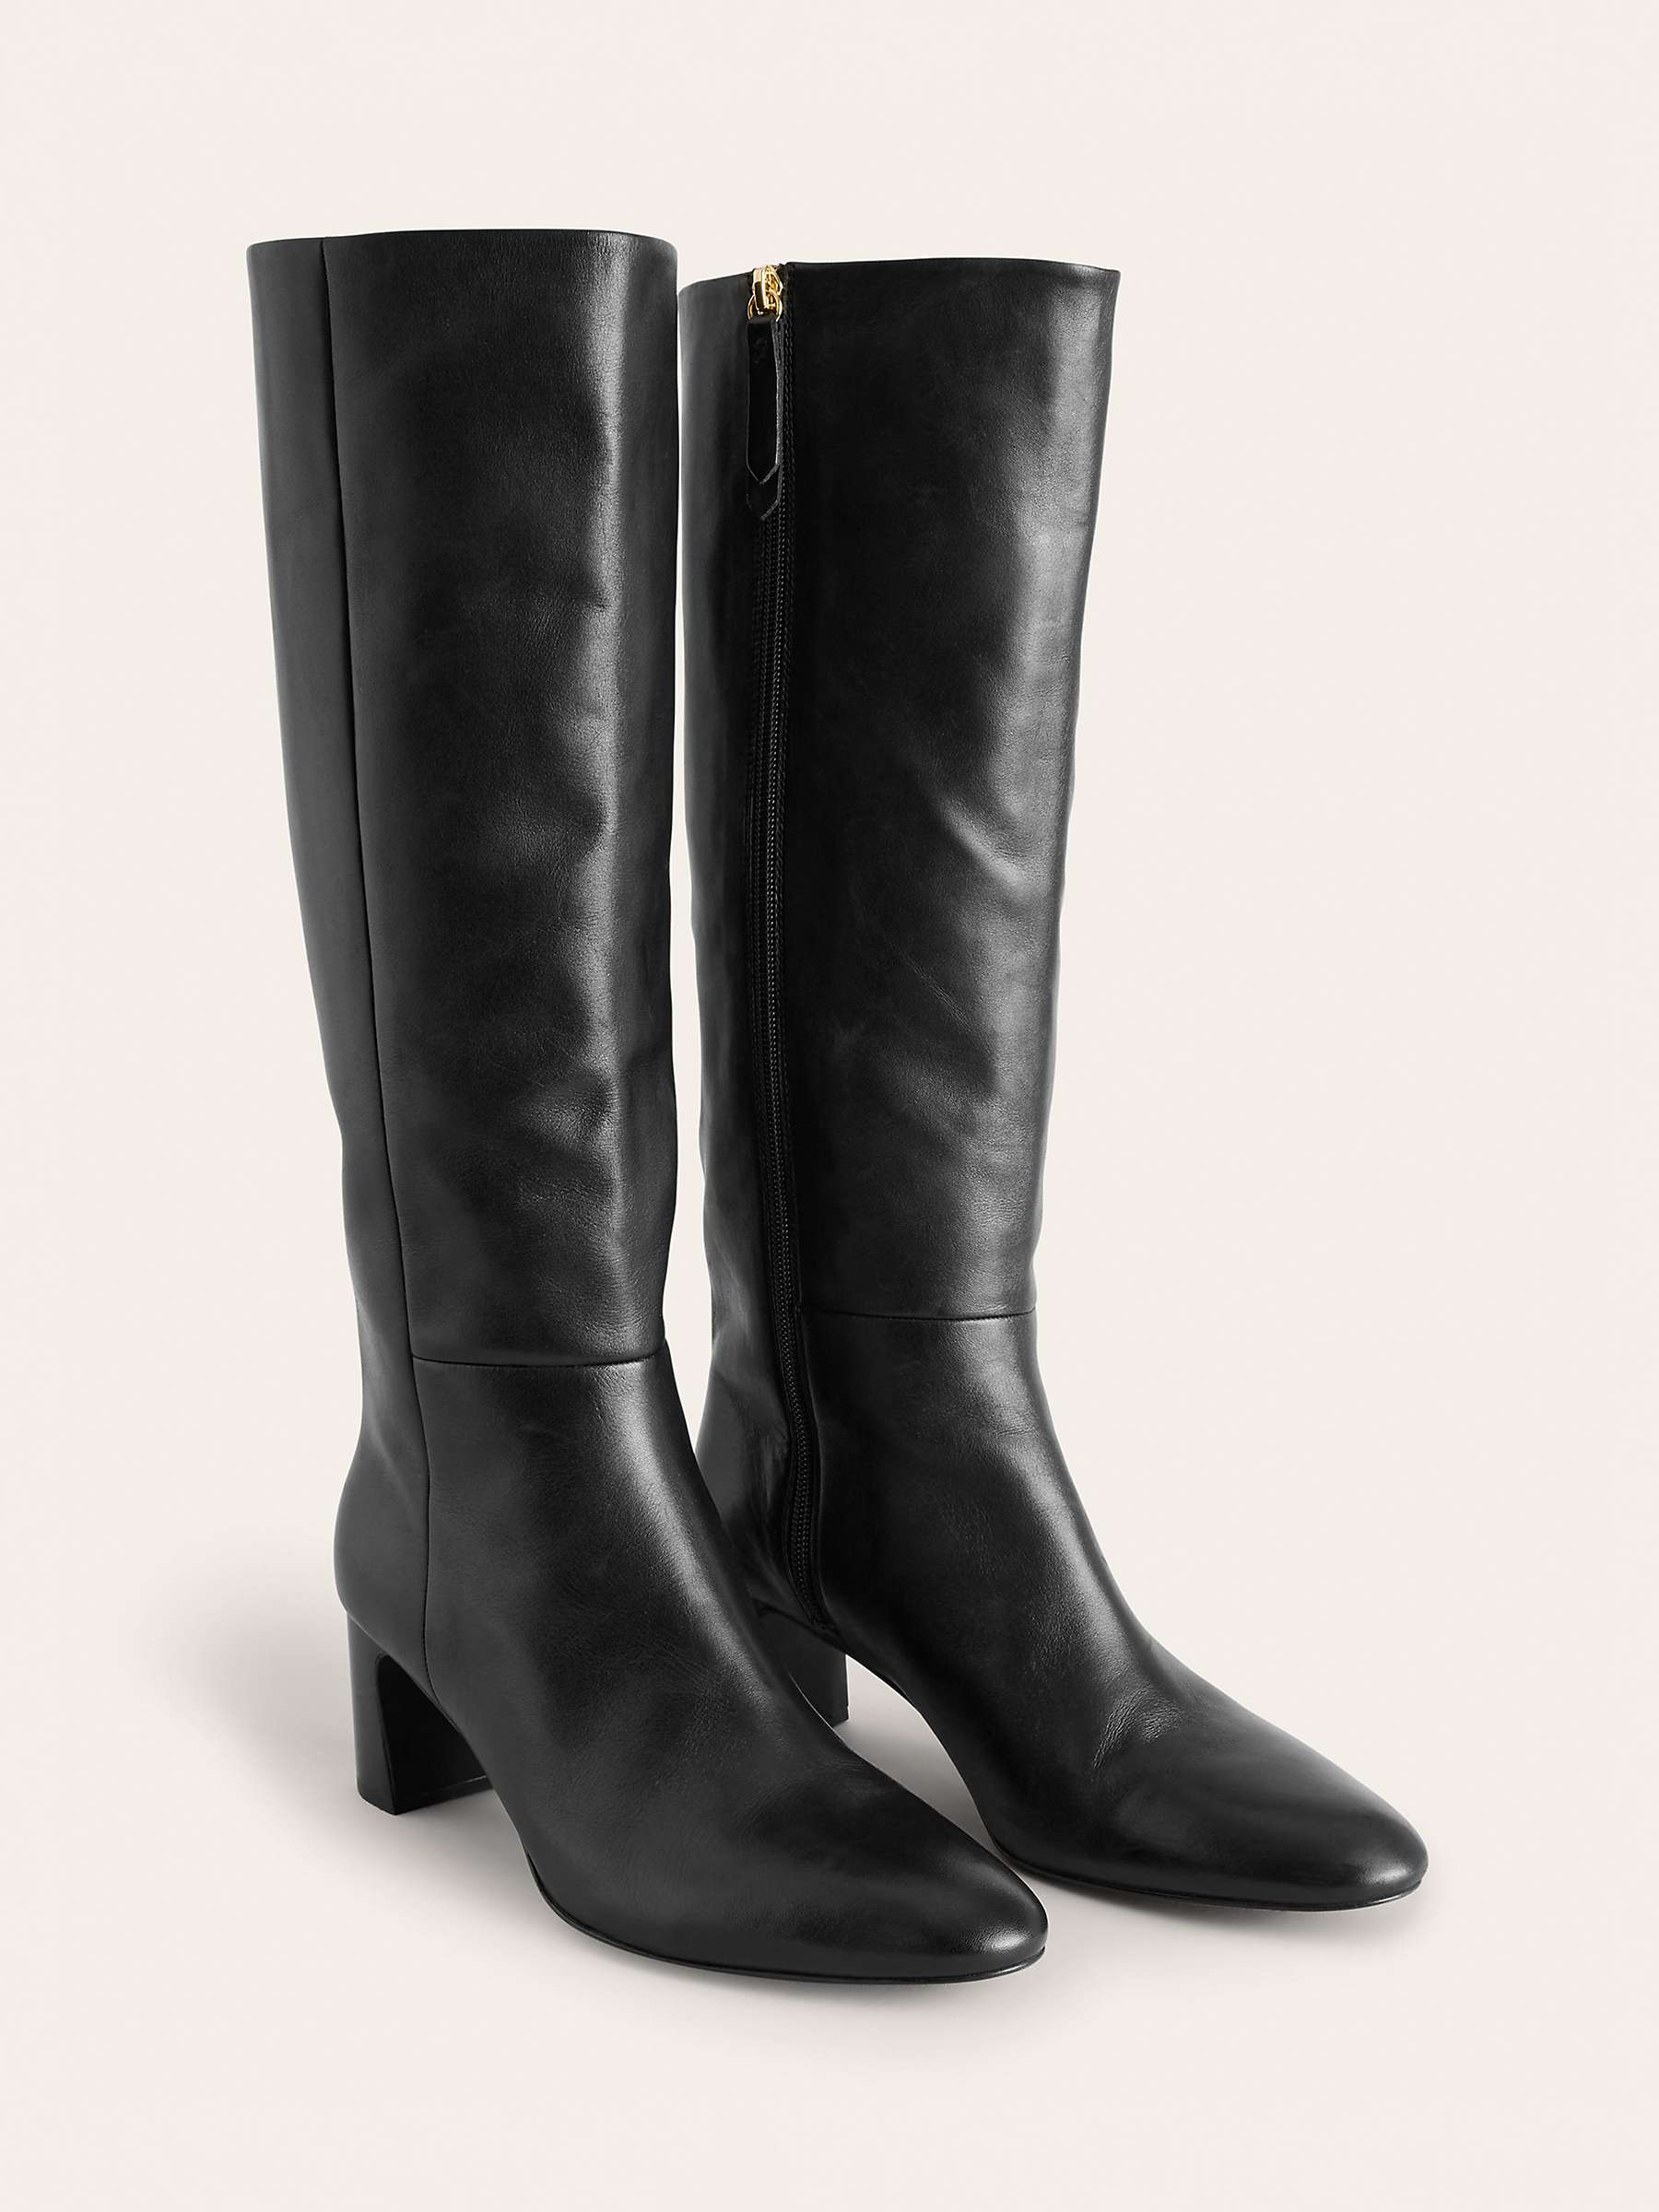 Buy Boden Erica Knee High Leather Boots Online at johnlewis.com